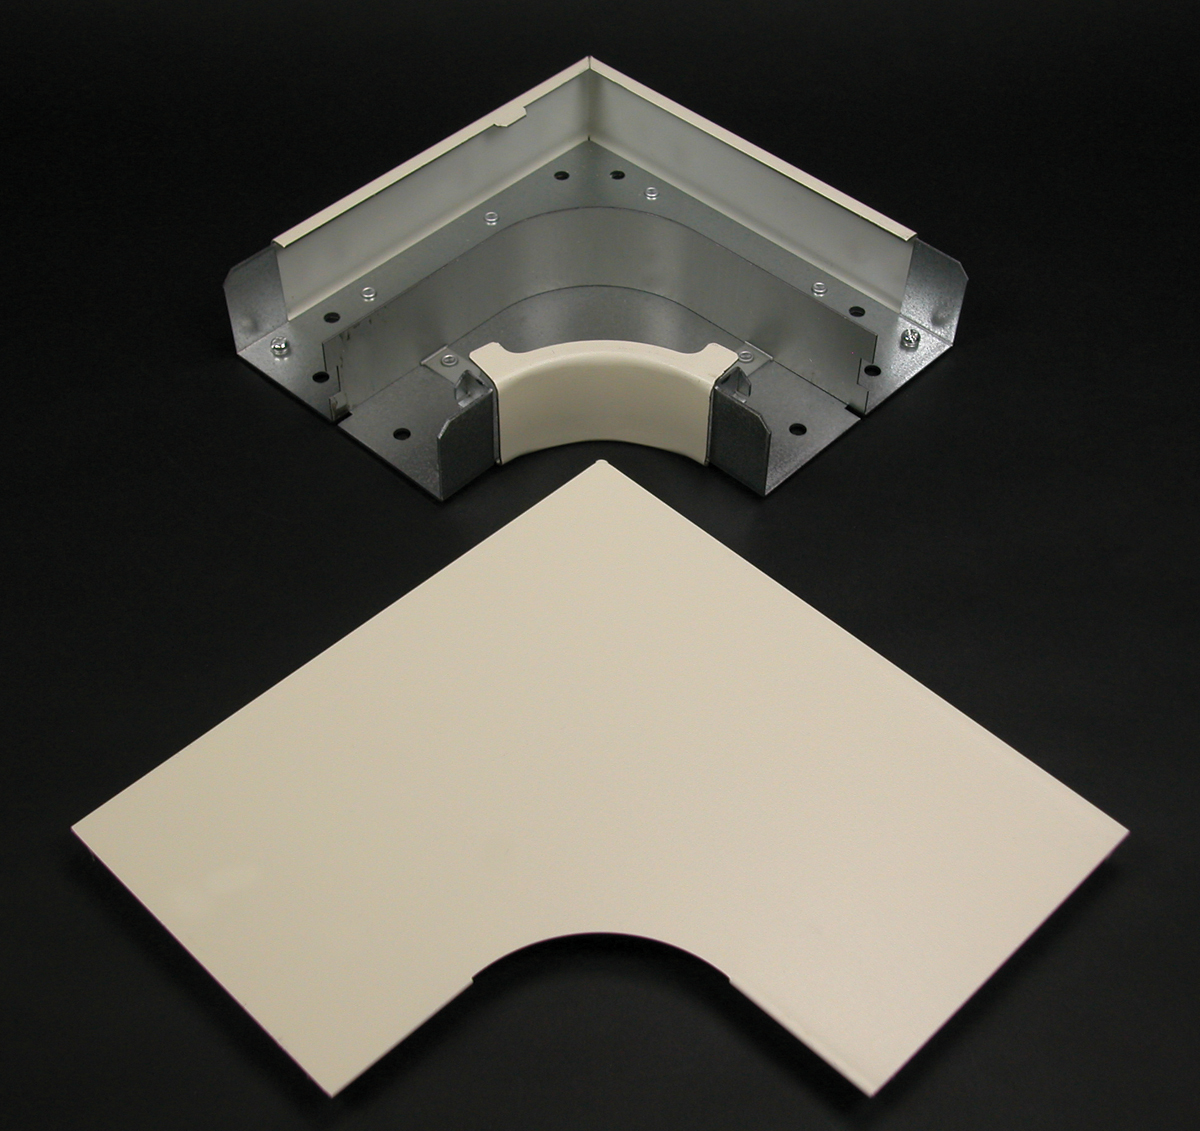 Full capacity 90 degree flat corner used in divided or undivided applications. Provides 2